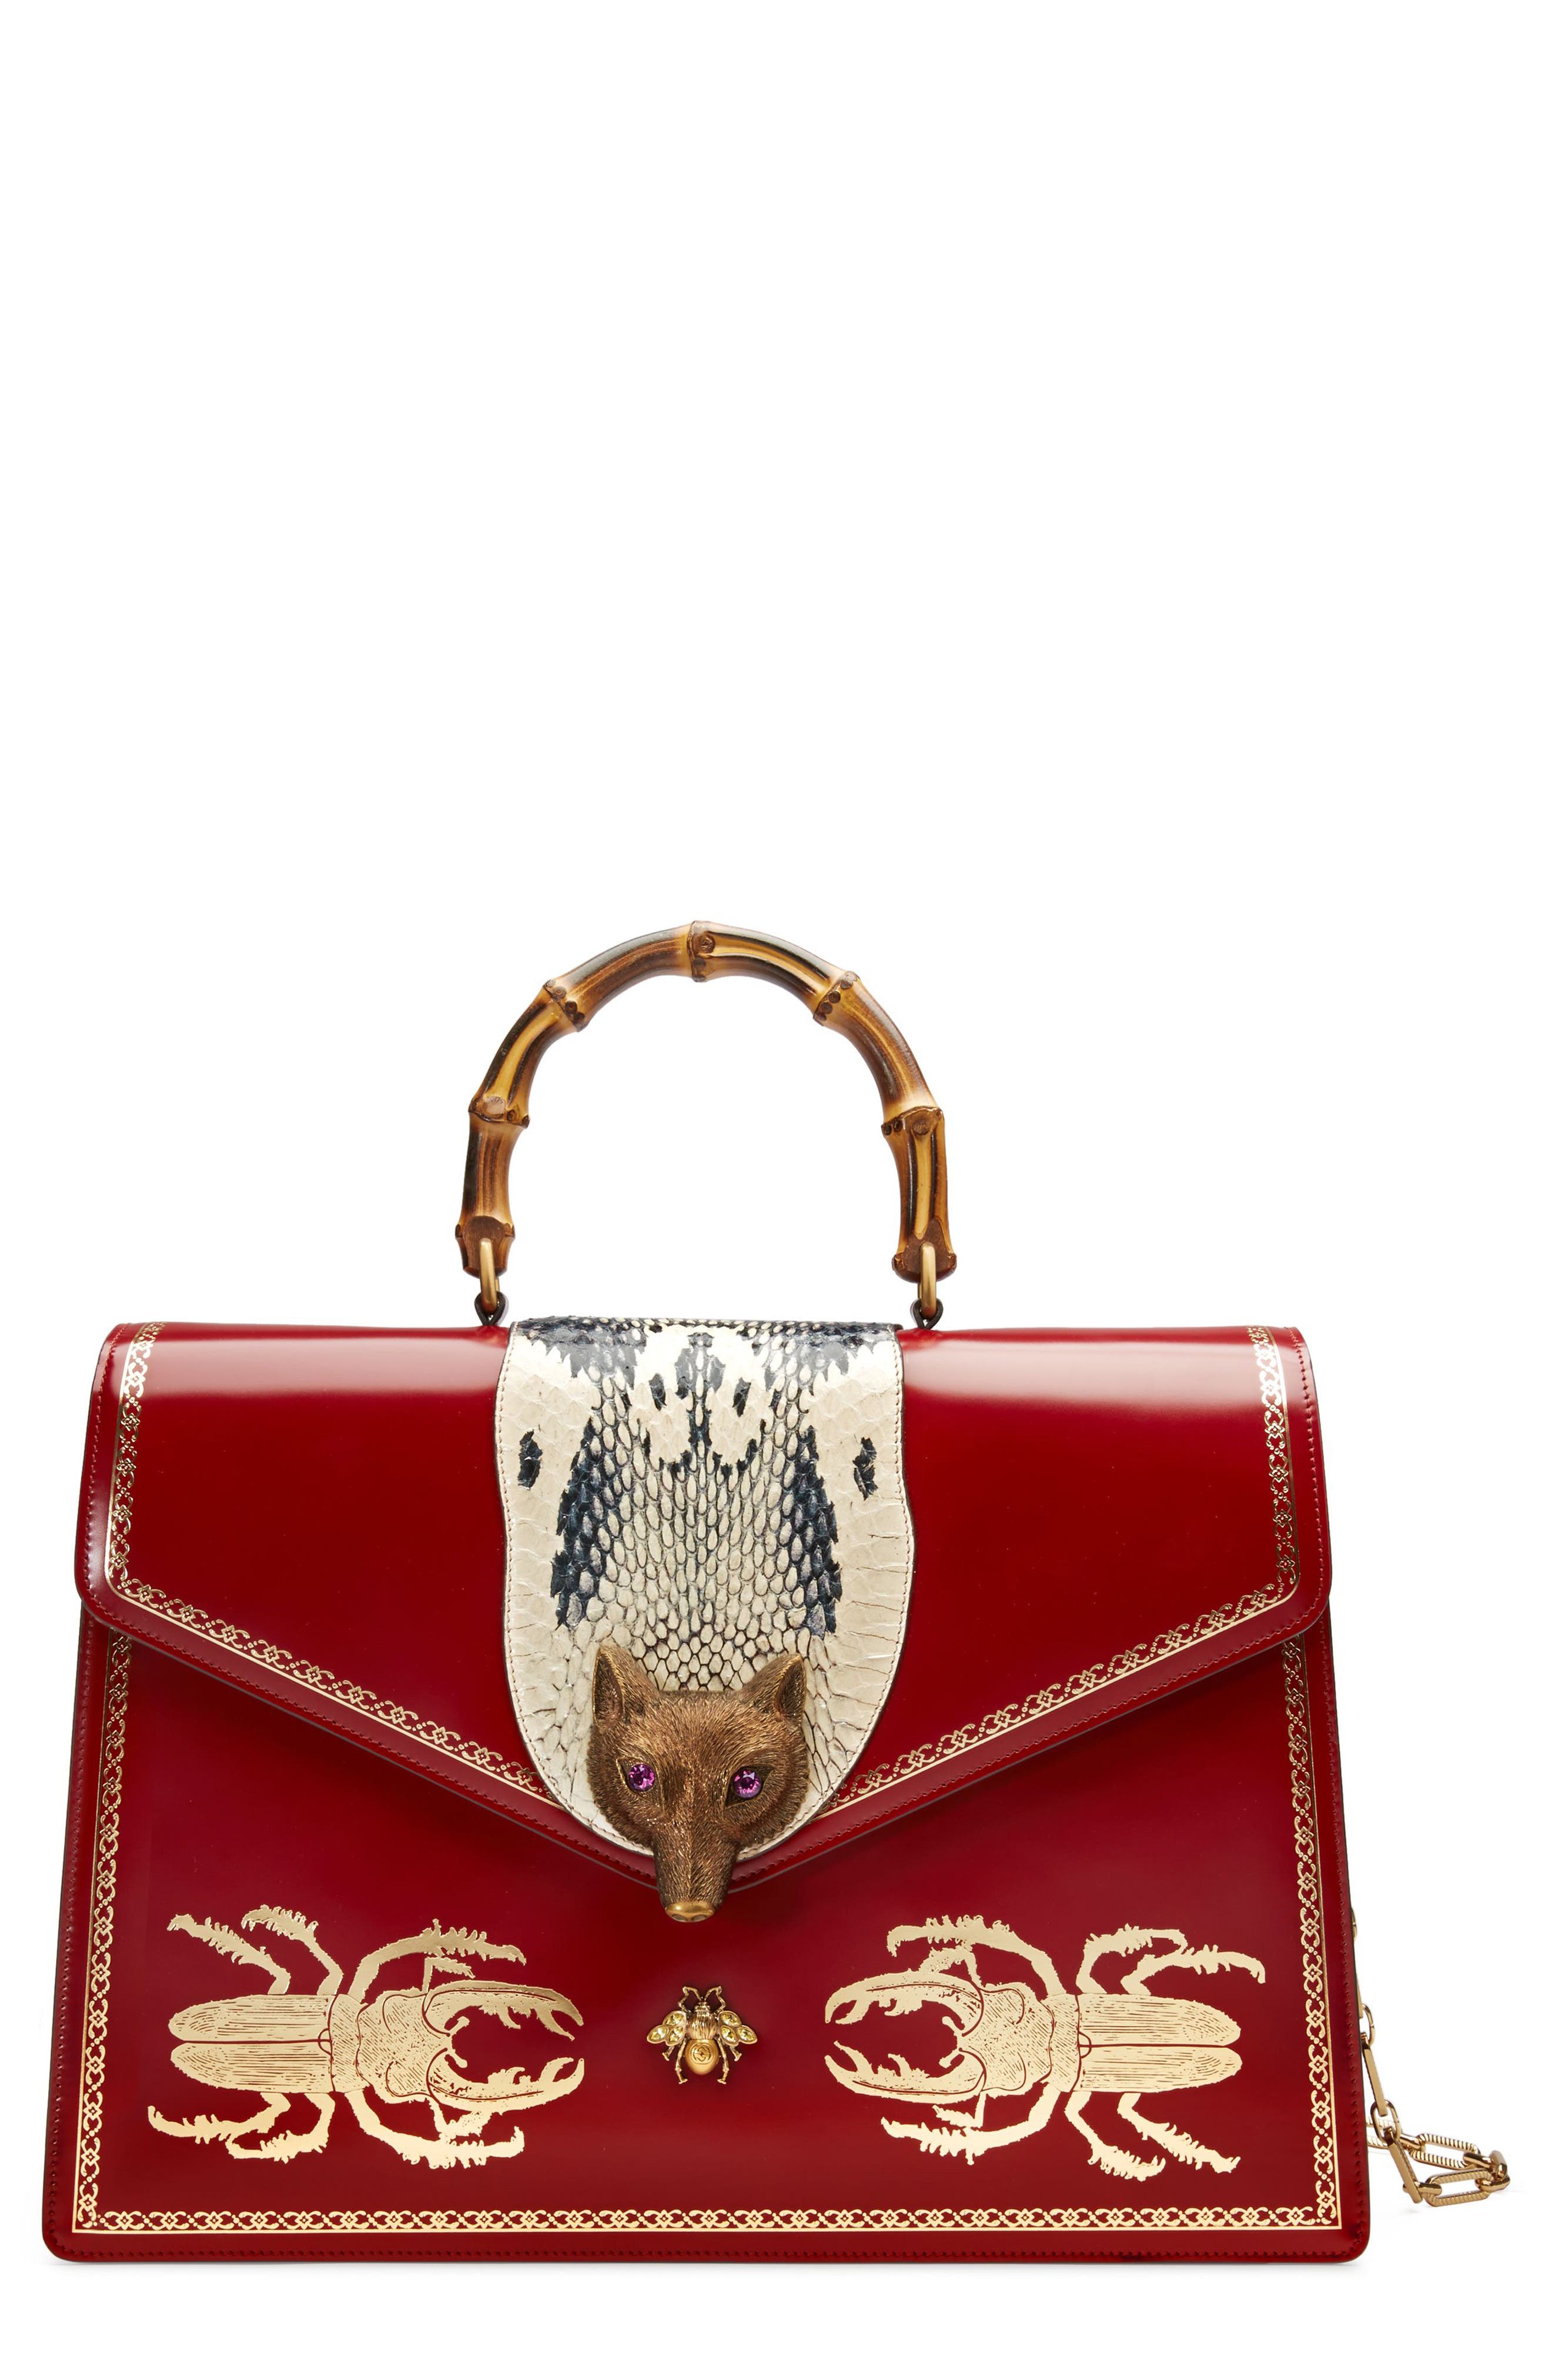 gucci bag with beetle